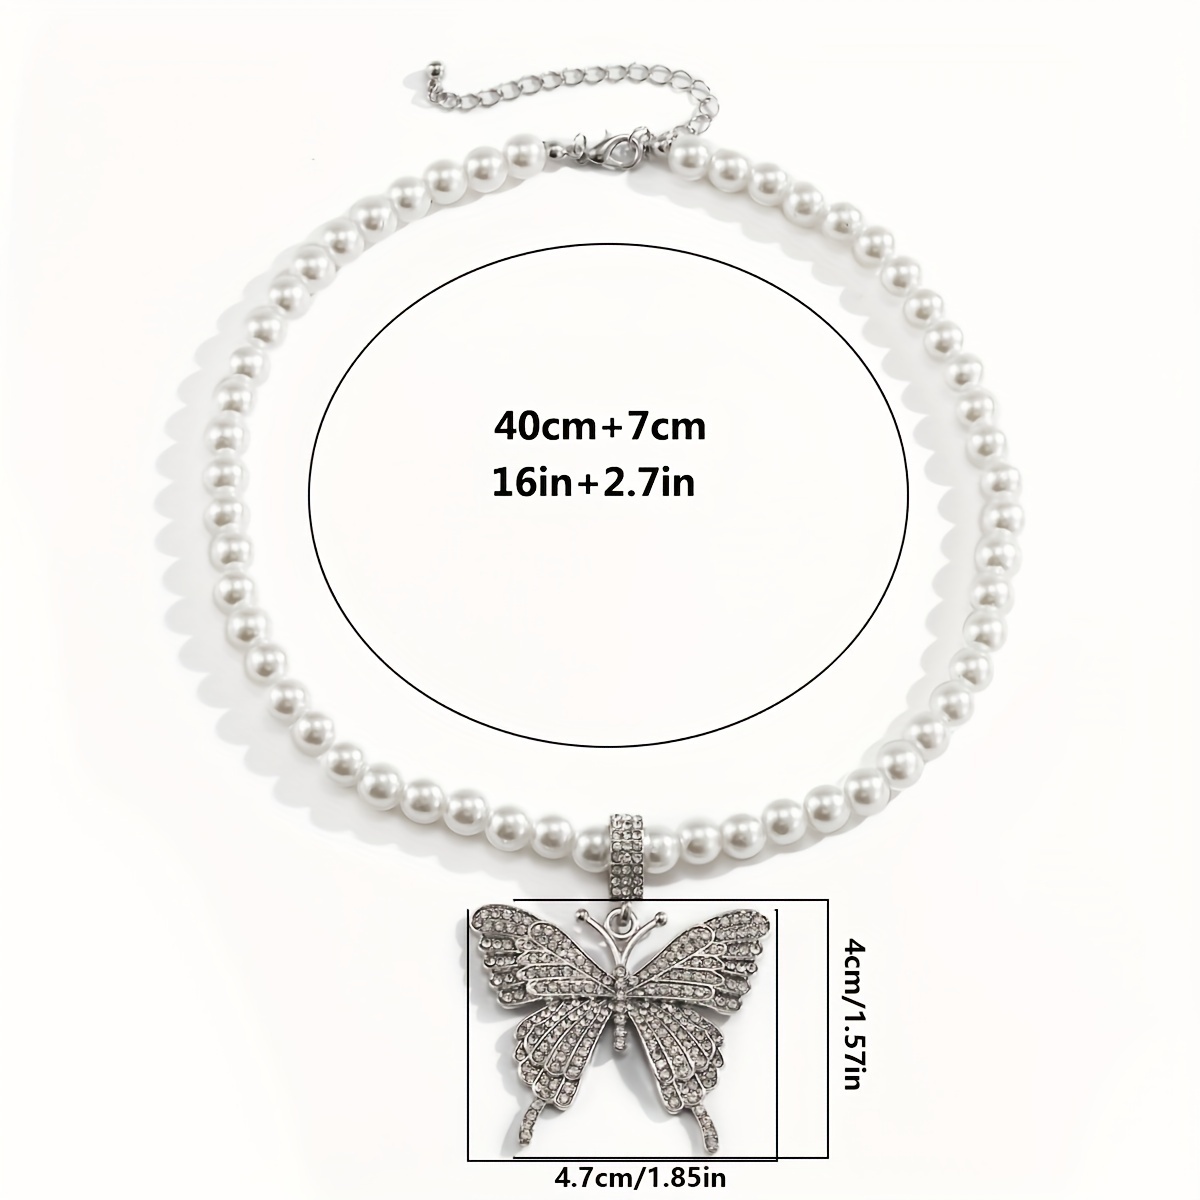 Rhinestone butterfly pendant pearl beaded necklace